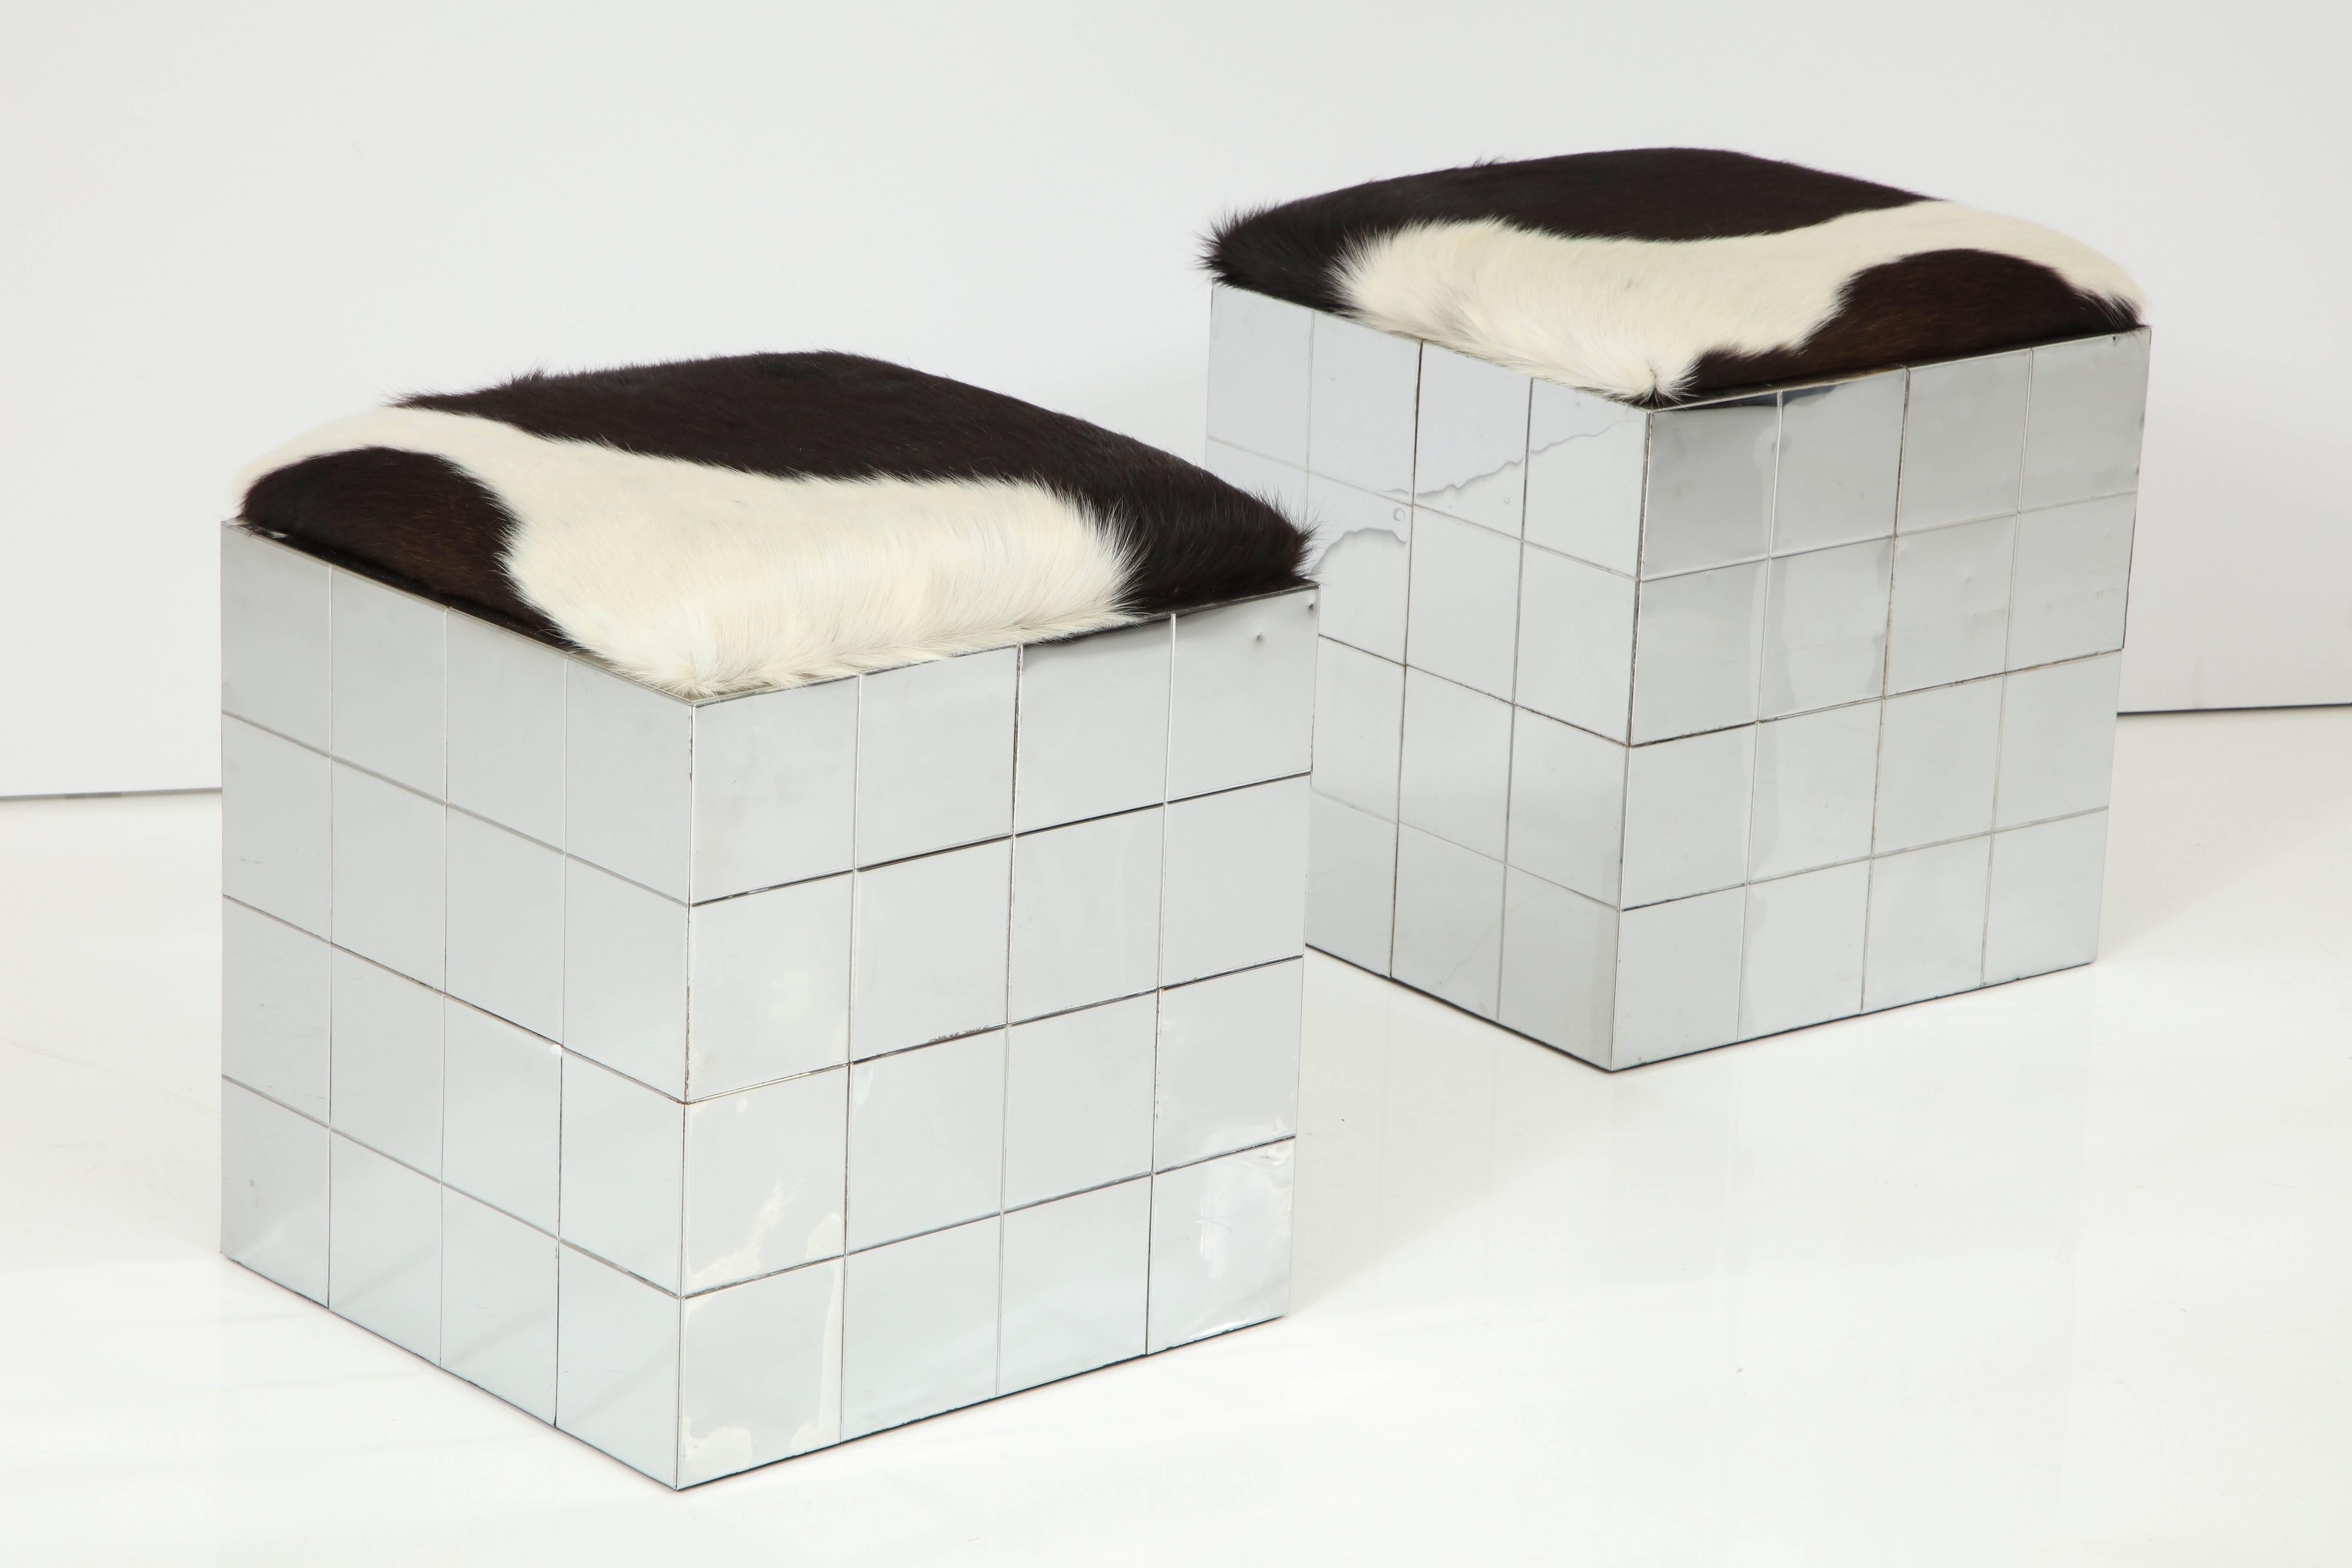 Pair of cowhide upholstered ottomans in the style of Paul Evans.
The polished chrome bases have an embossed grid pattern.
The padded tops have been newly reupholstered.
There are a few minor dings consistent with age.